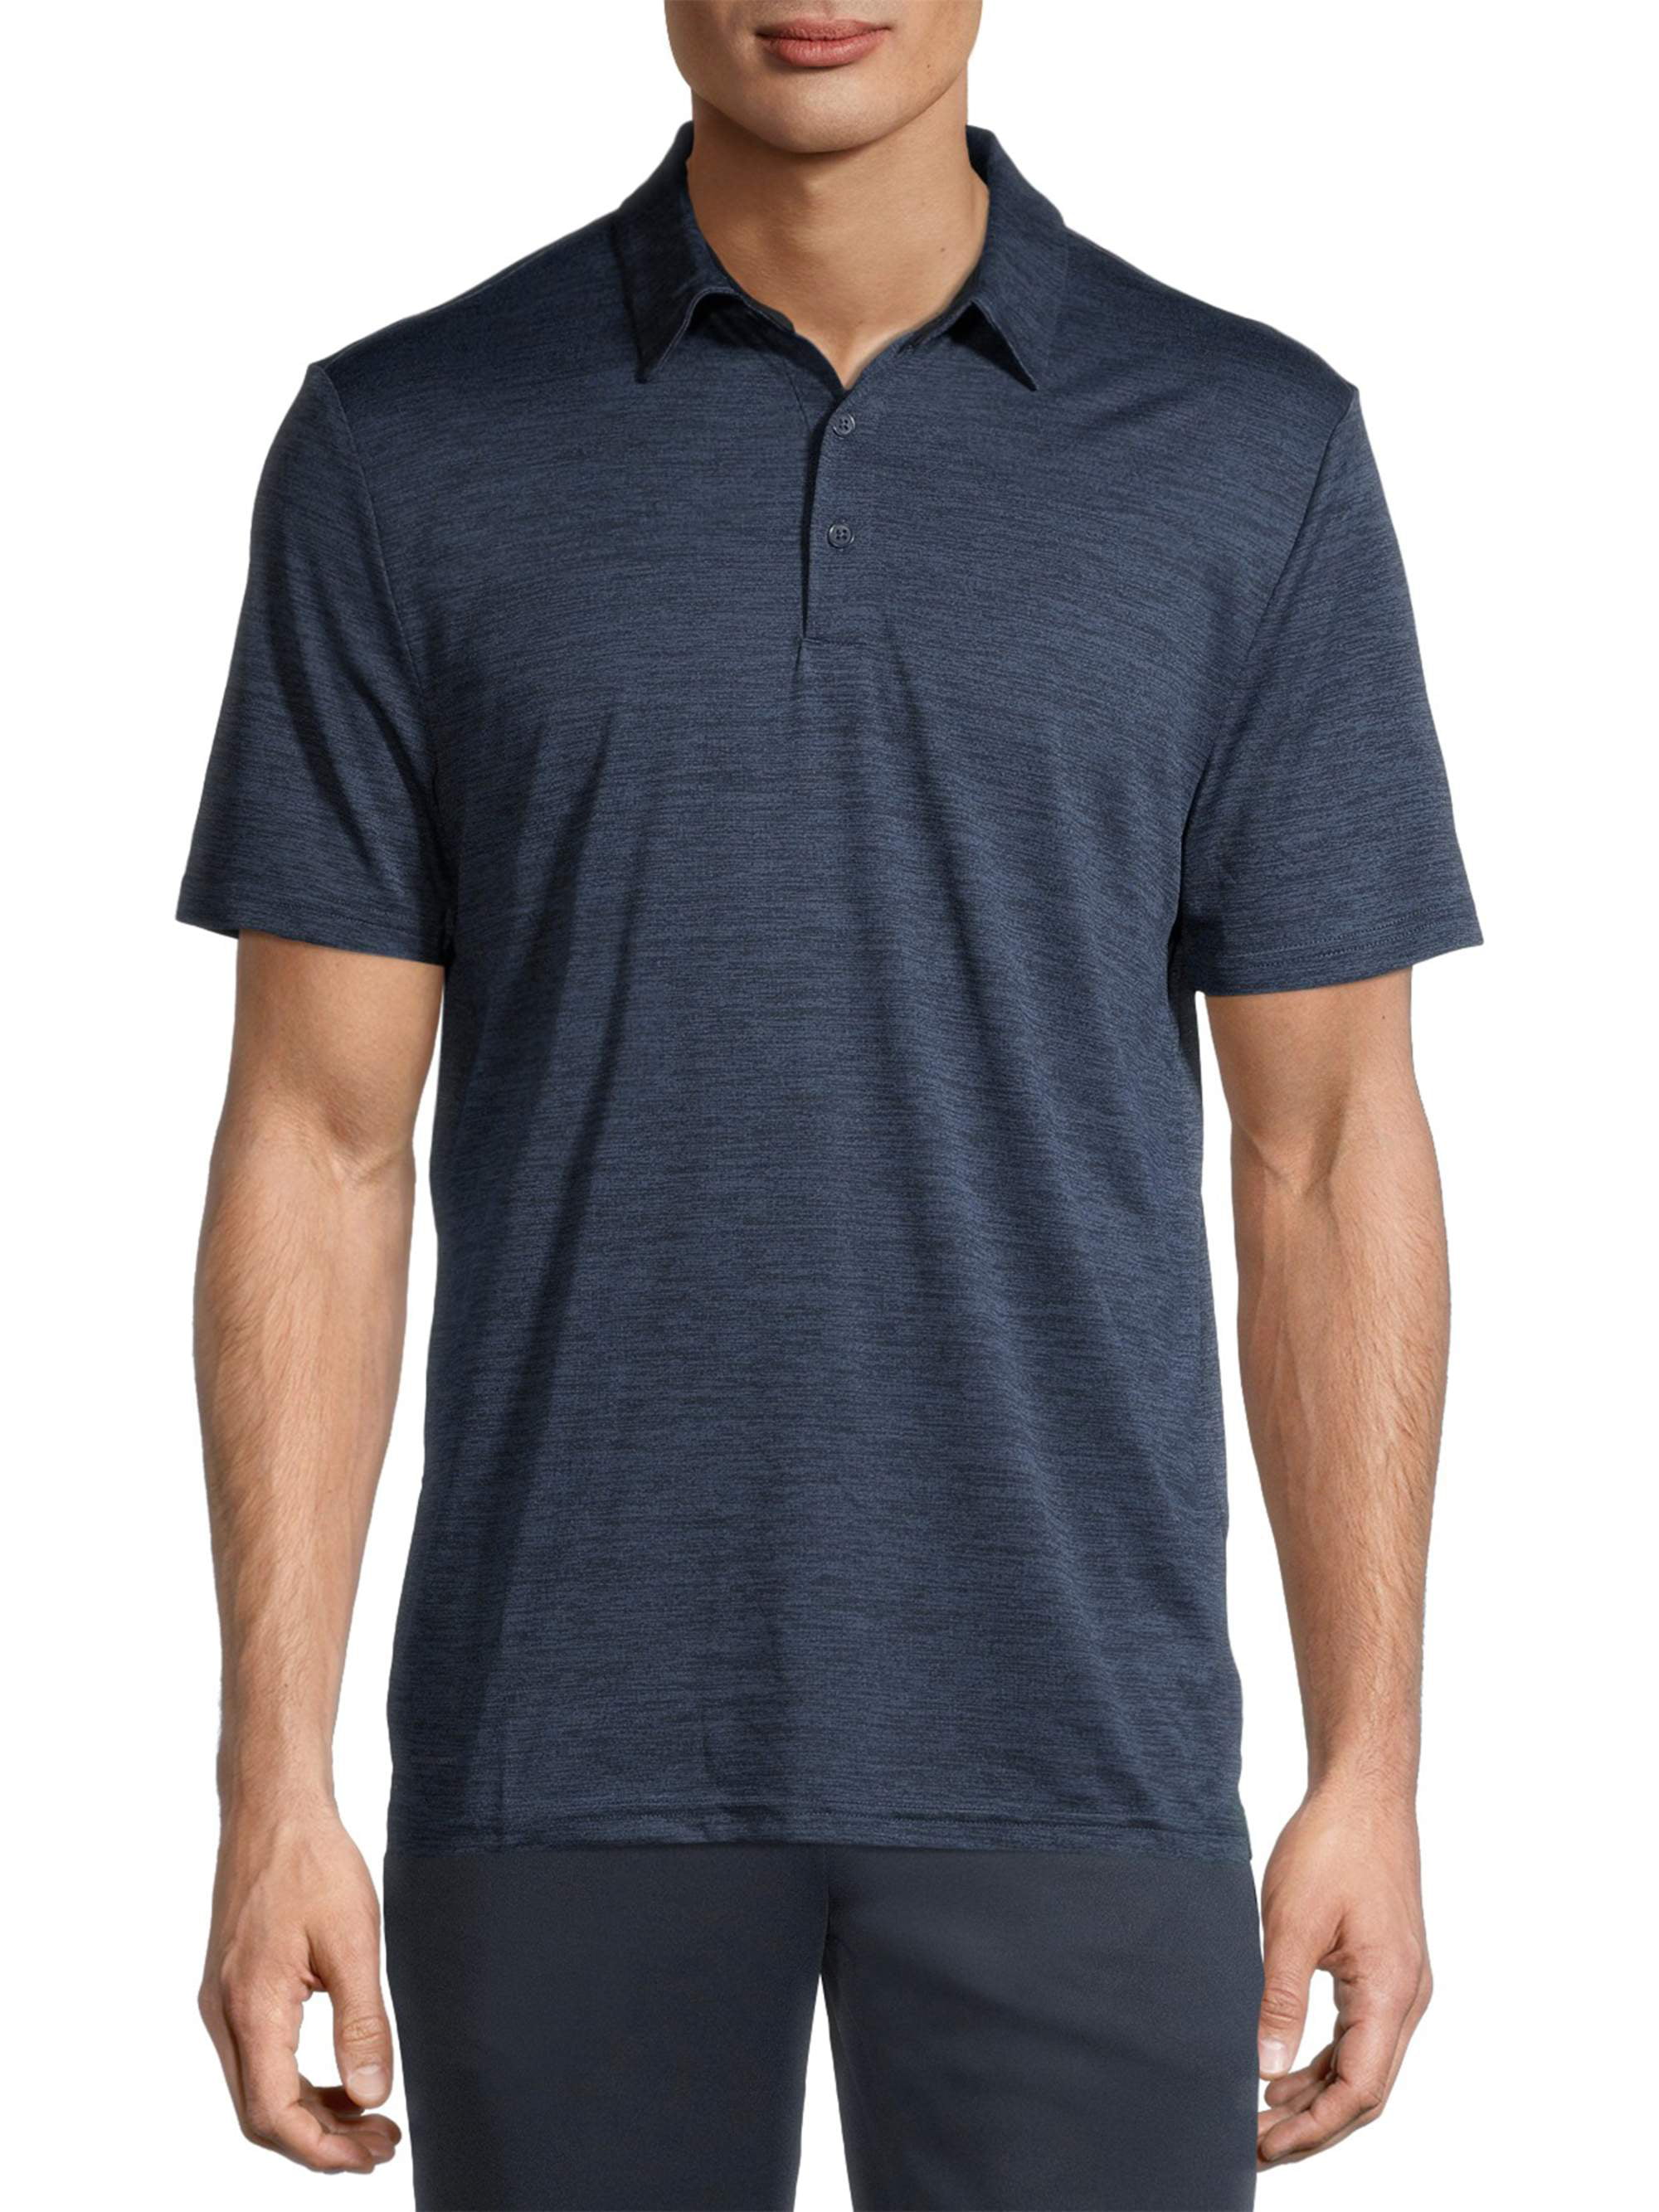 Layer 8 Men's Sueded Stretch Heather Polo with Contrast Back - Walmart.com